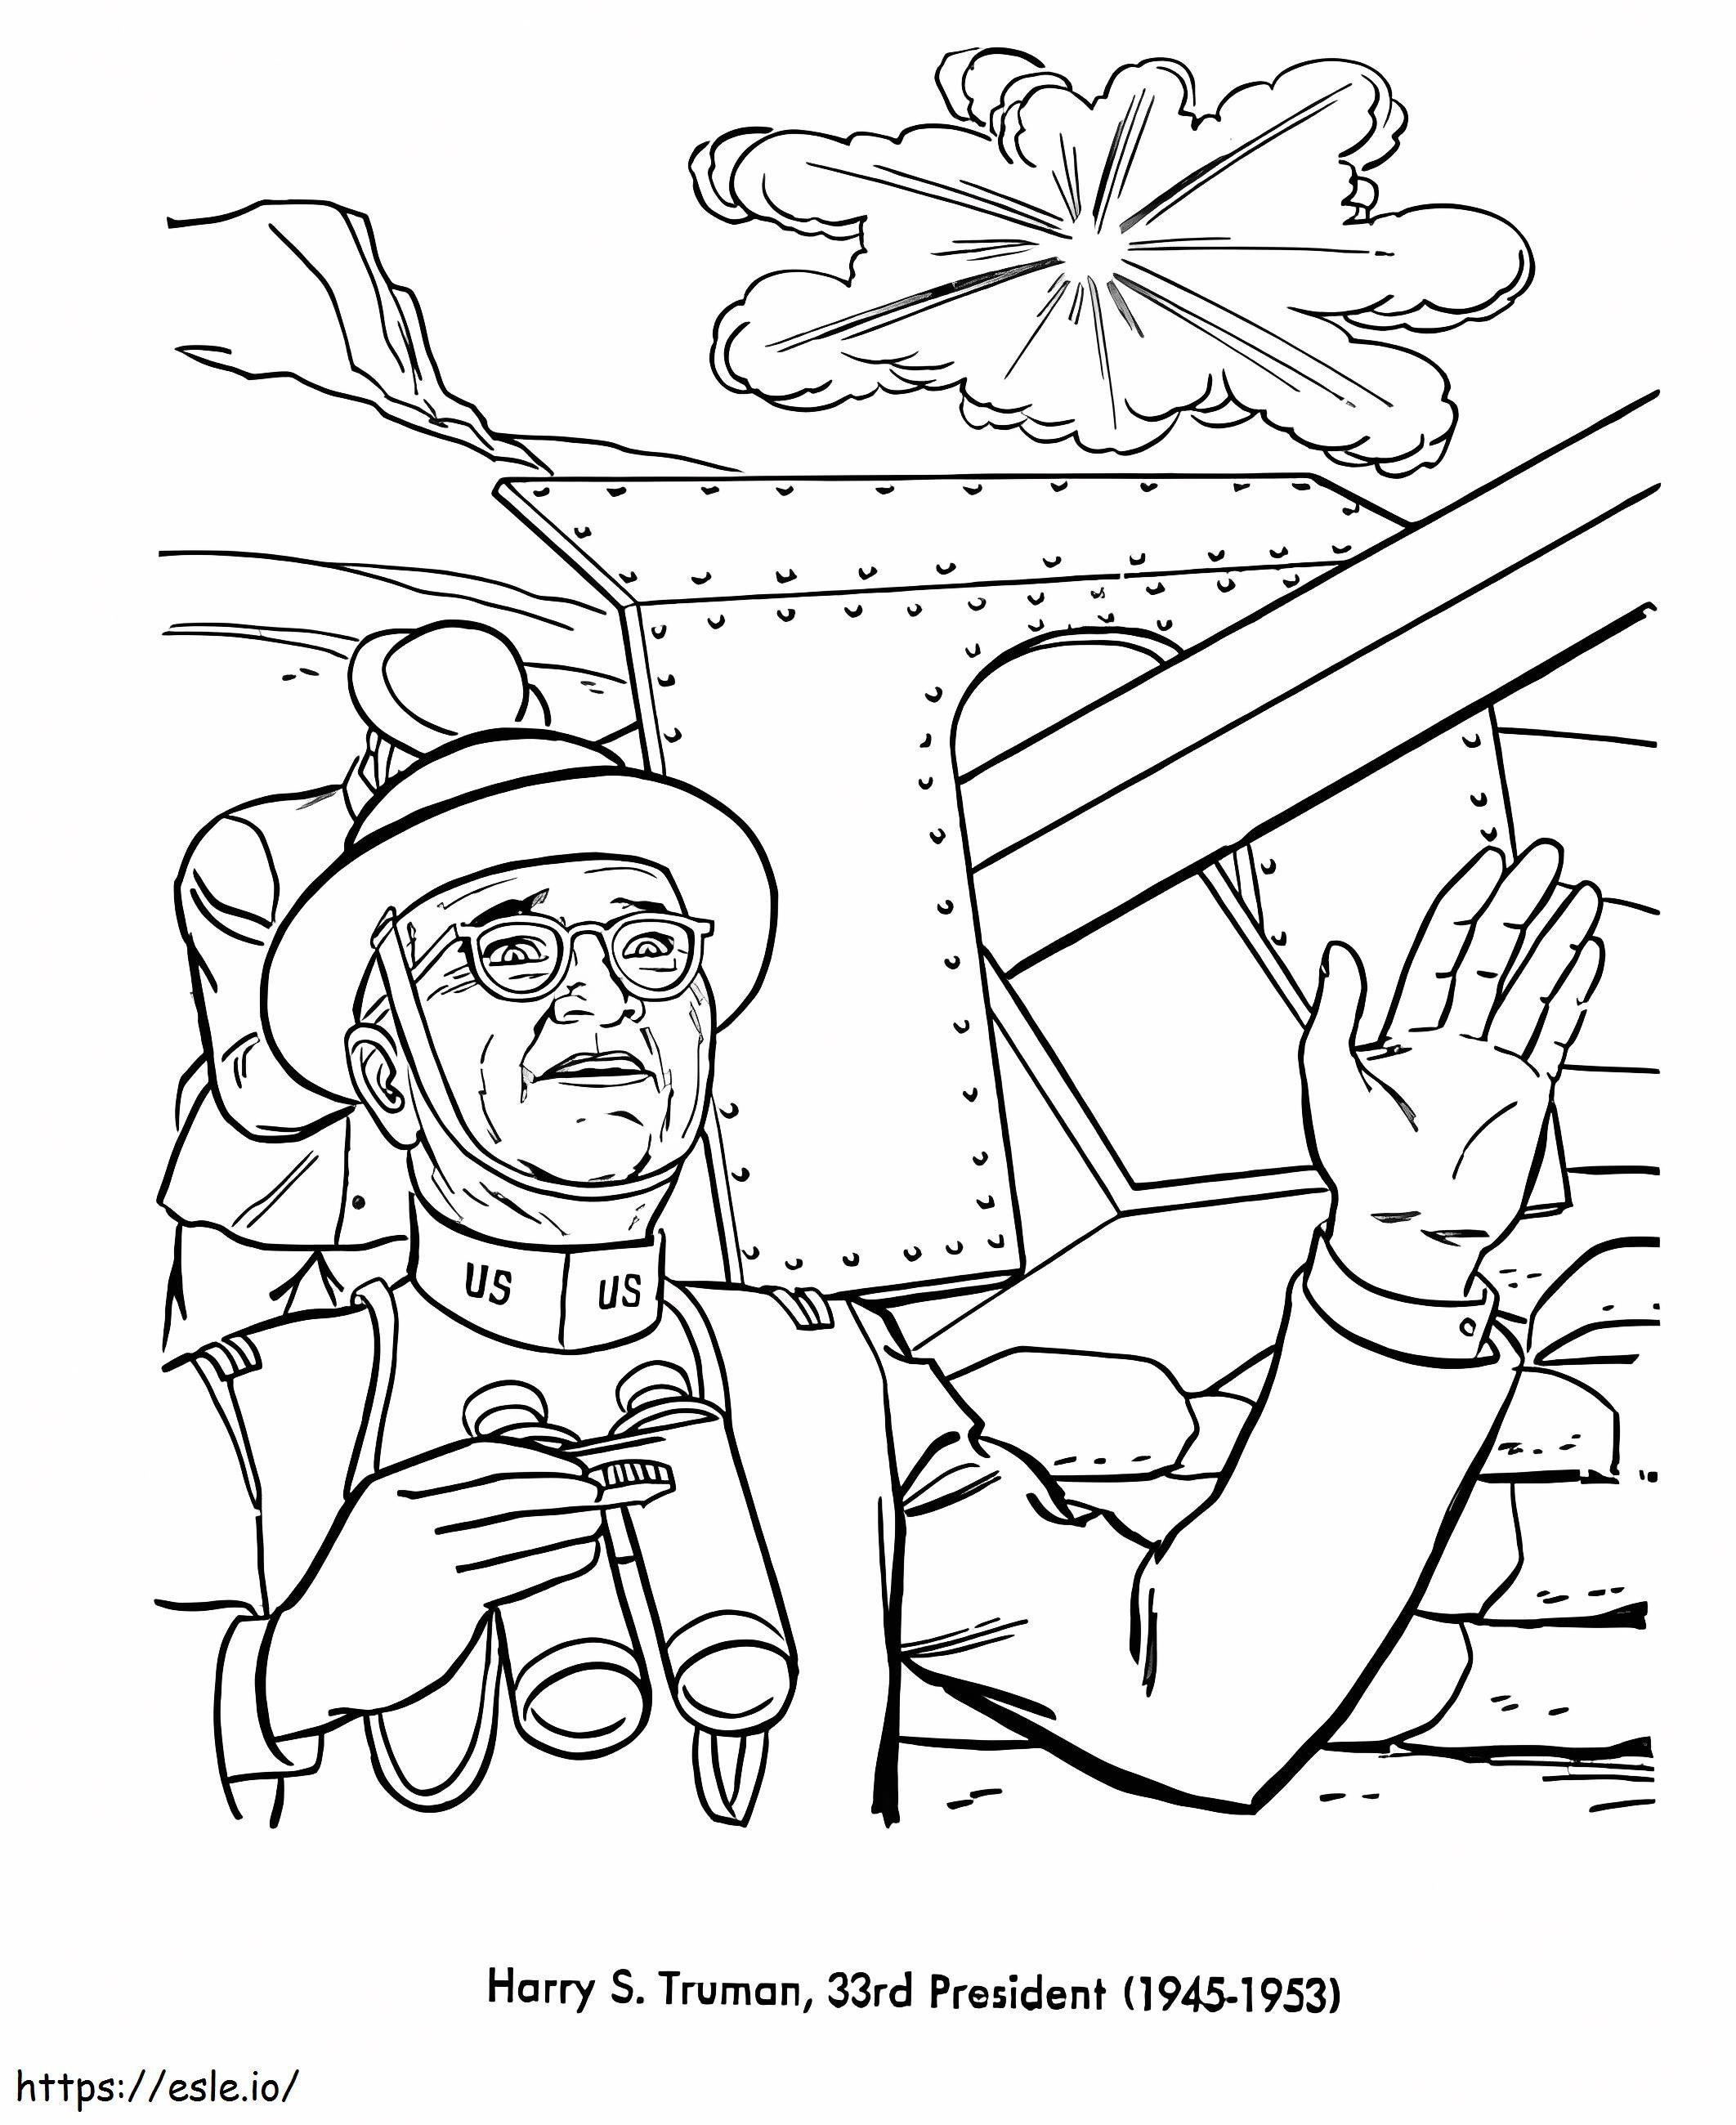 Rd President Harry S. Truman coloring page